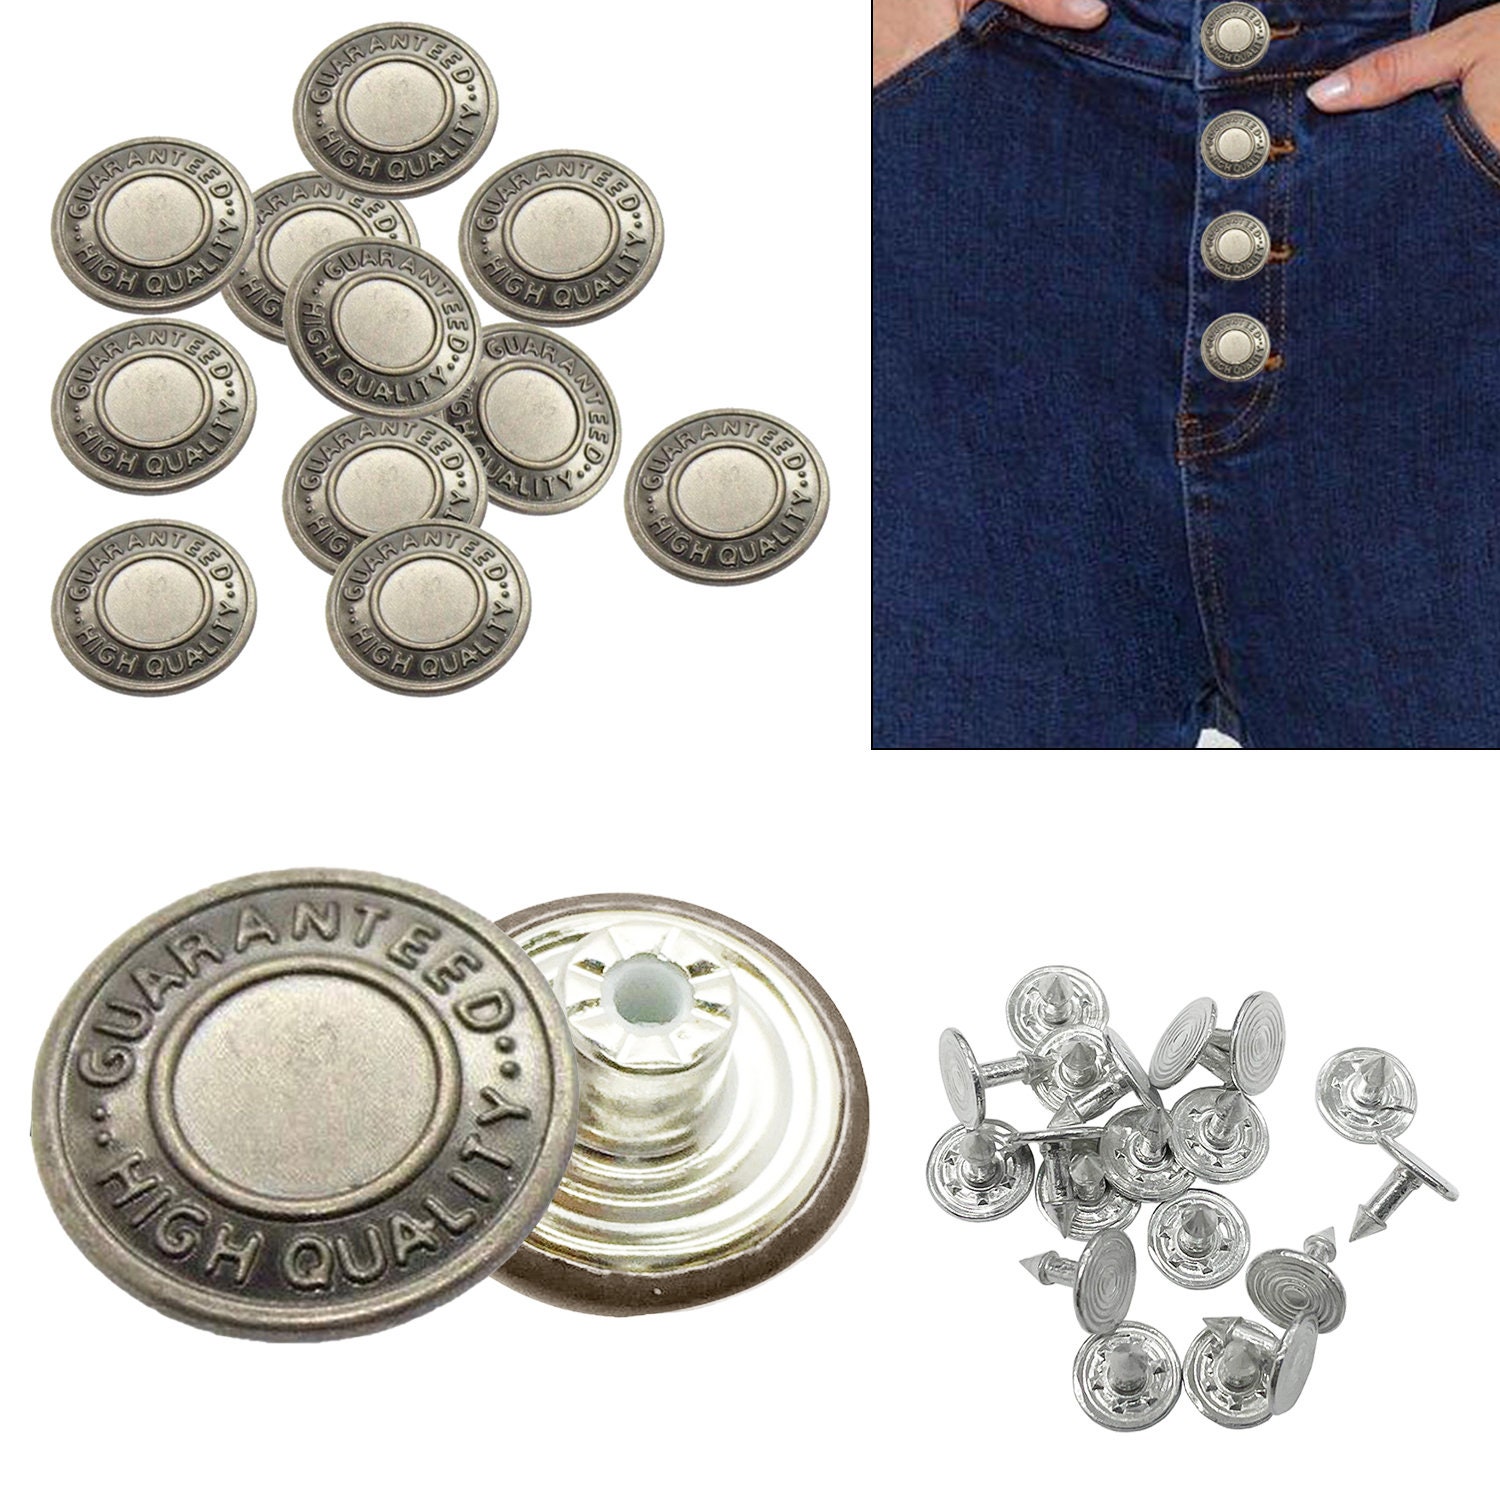 10PCS Jeans Buttons Replacement 17mm No Sewing Metal Button Repair